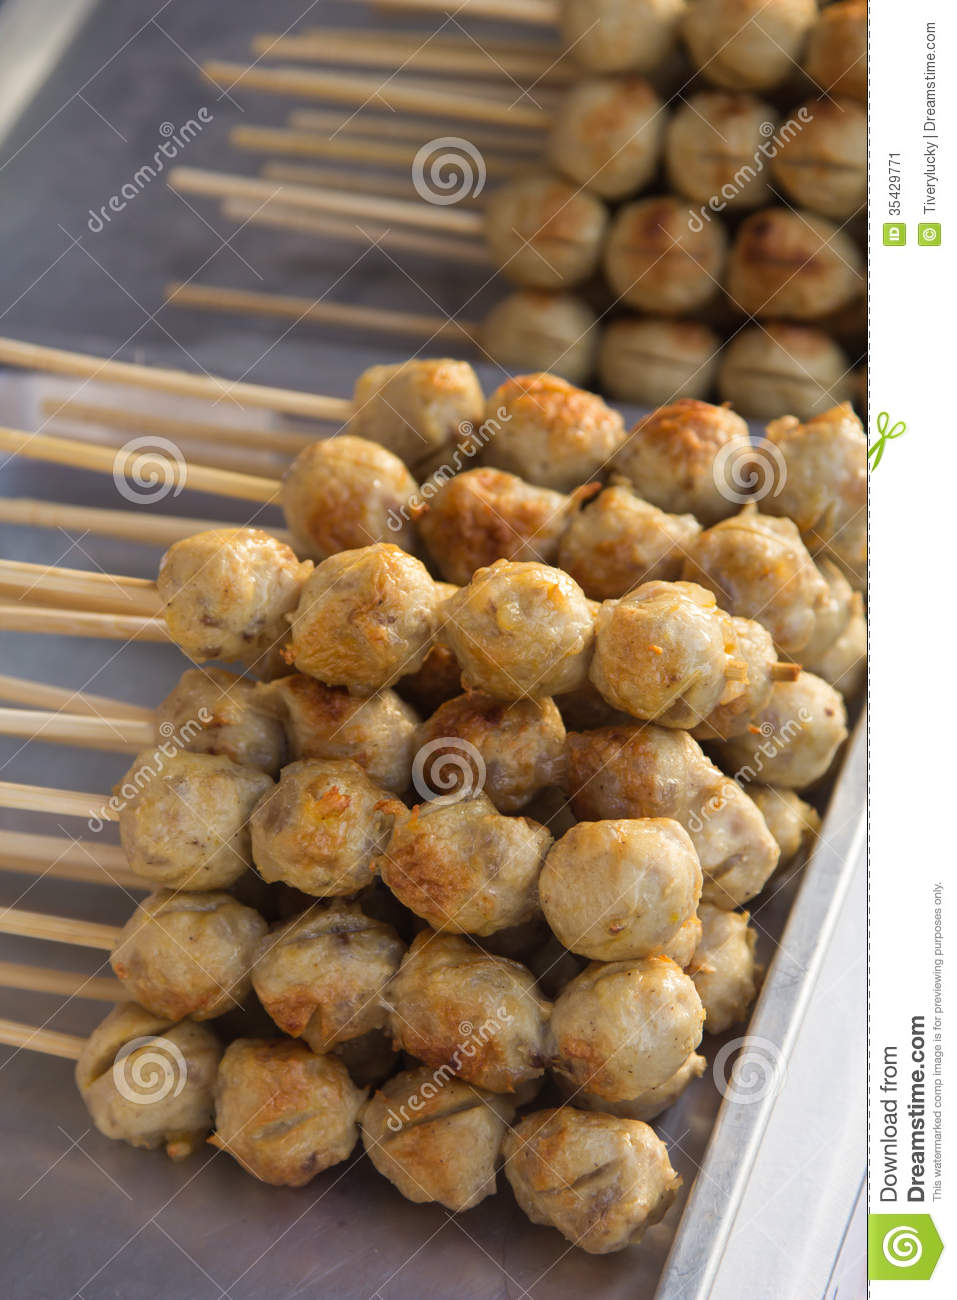 Meat Ball Stock Image   Image  35429771